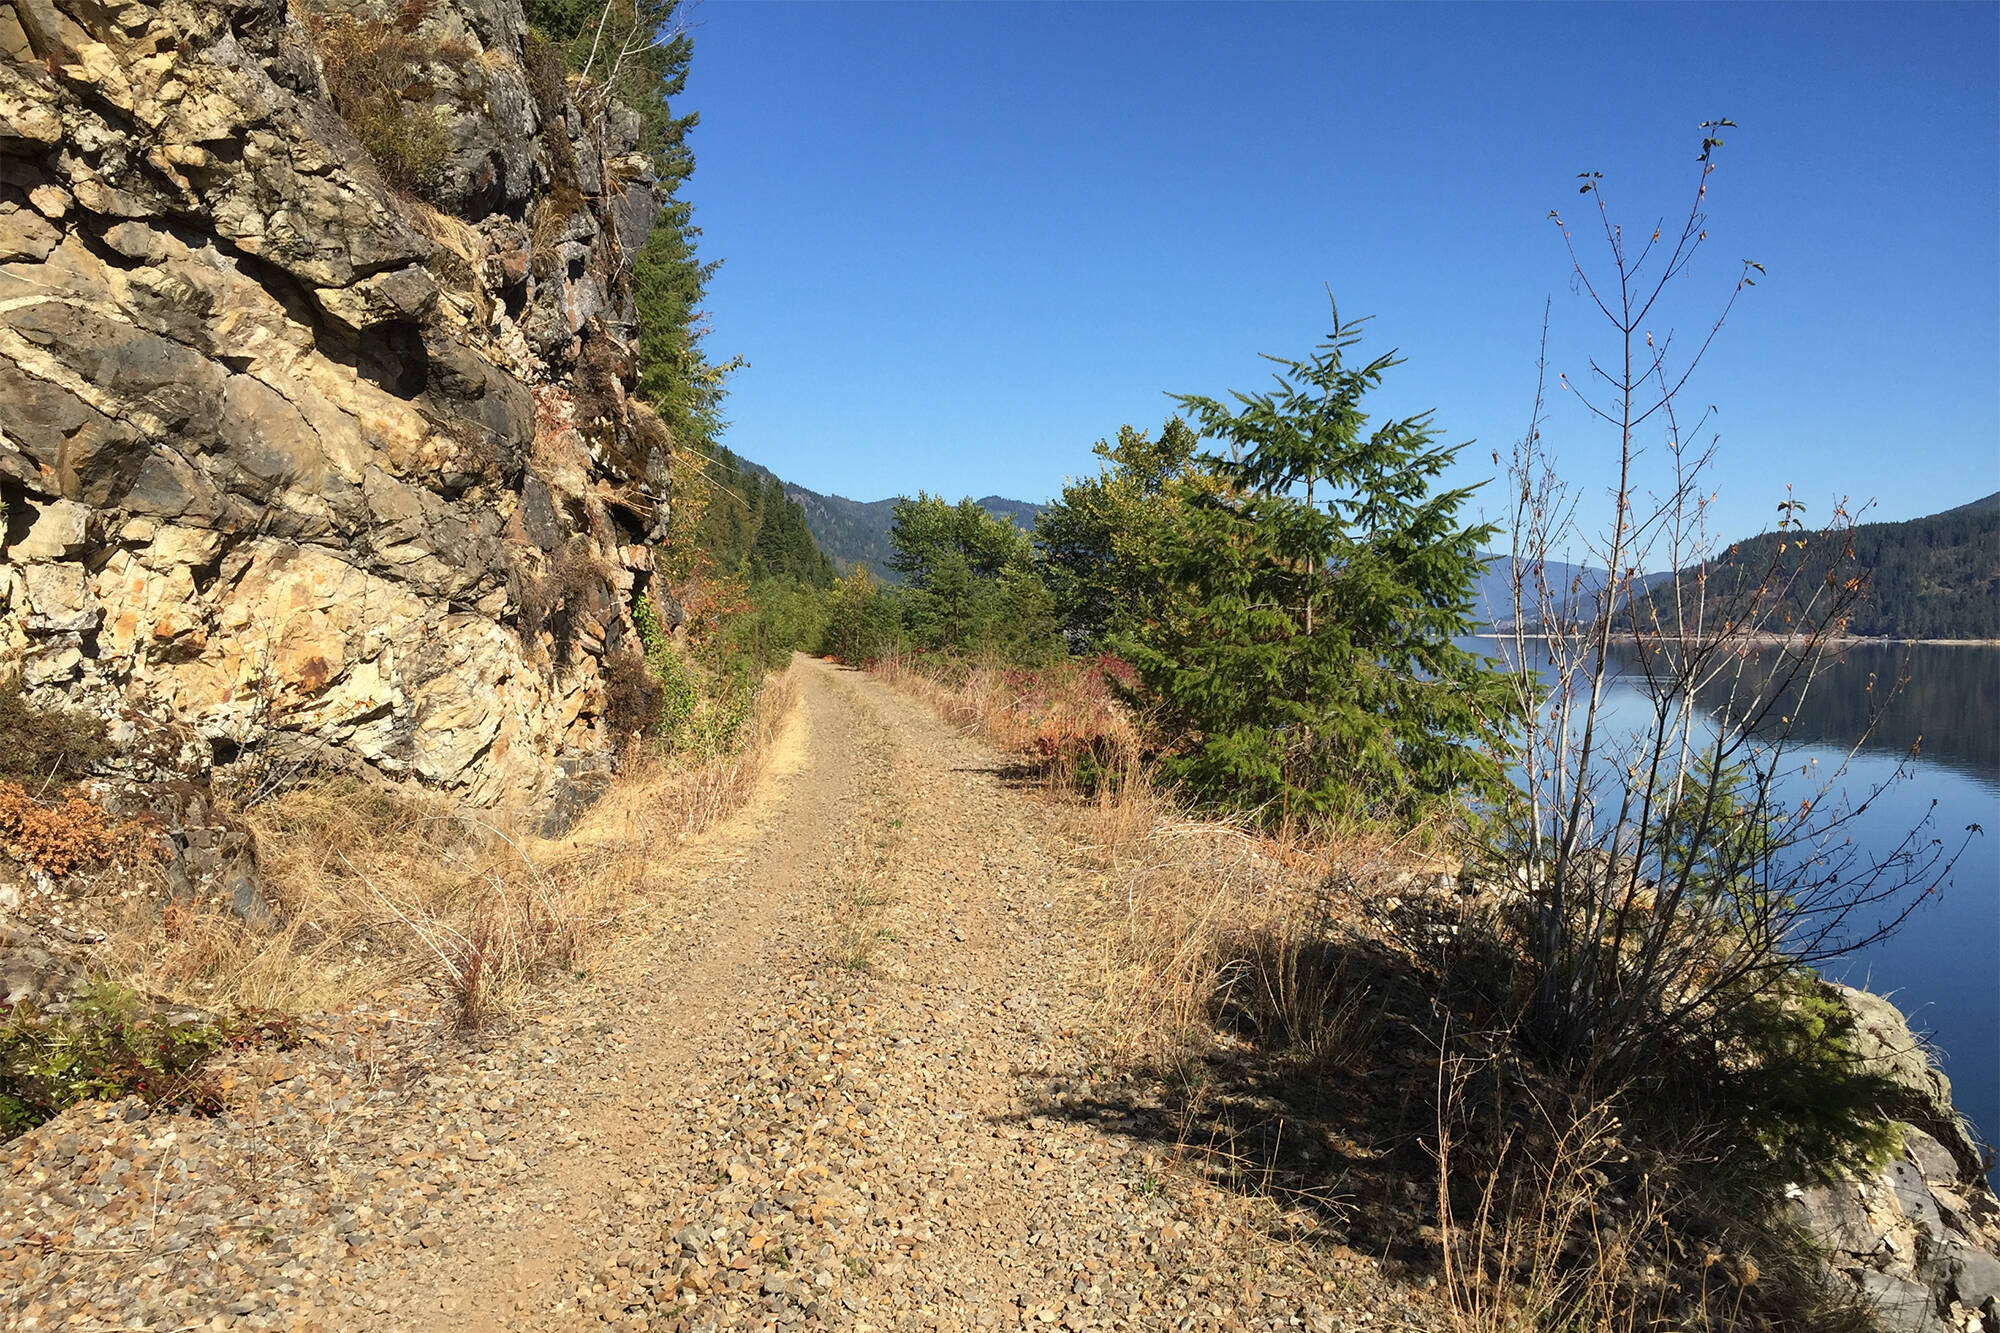 Purchase of the Sicamous to Armstrong rail corridor by the Regional District of North Okanagan and the Columbia Shuswap Regional District (excluding portions owned by the Splatsin), was completed in early 2018. (Photo contributed)